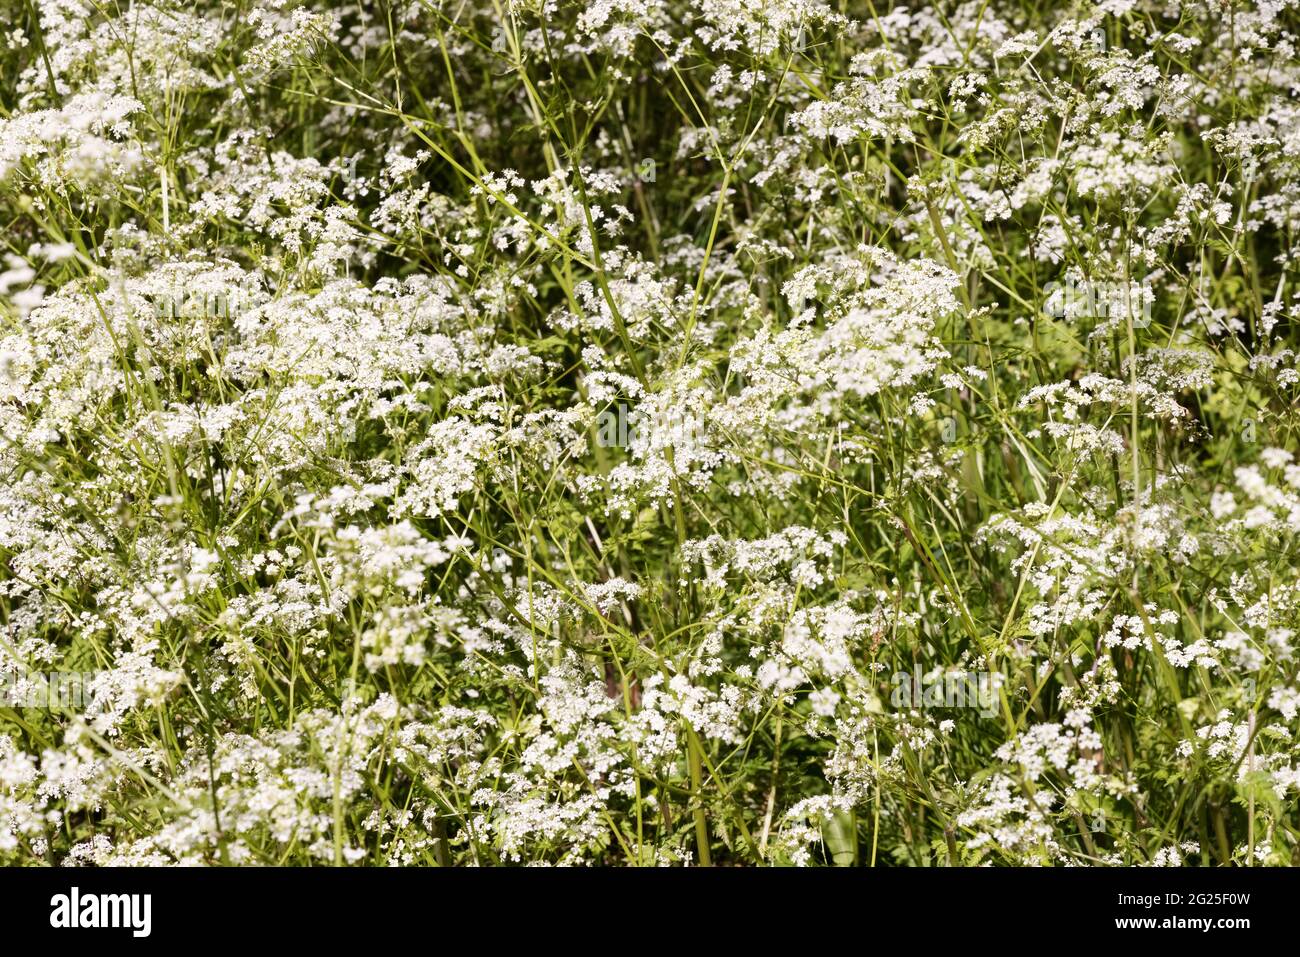 Cow parsley, Anthriscus sylvestris, aka wild chervil, wild beaked parsley, Queen Anne's lace or keck, growing in the UK Stock Photo